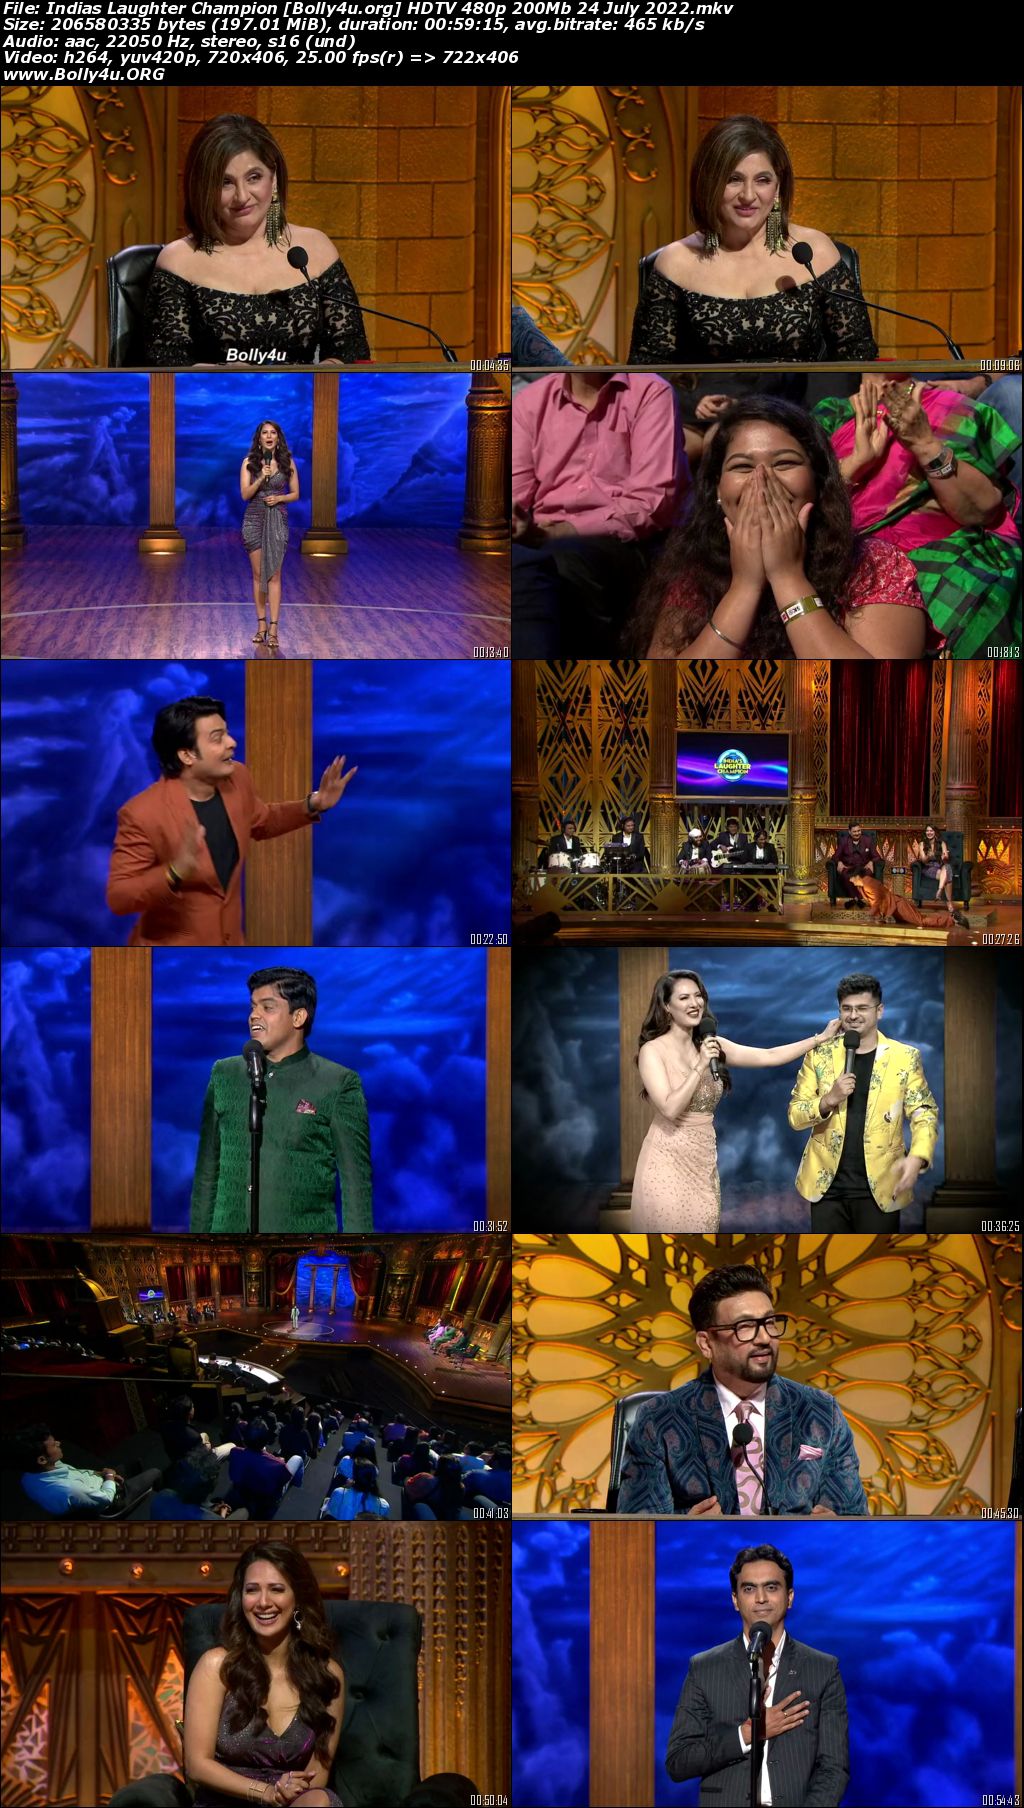 Indias Laughter Champion HDTV 480p 200Mb 24 July 2022 Download